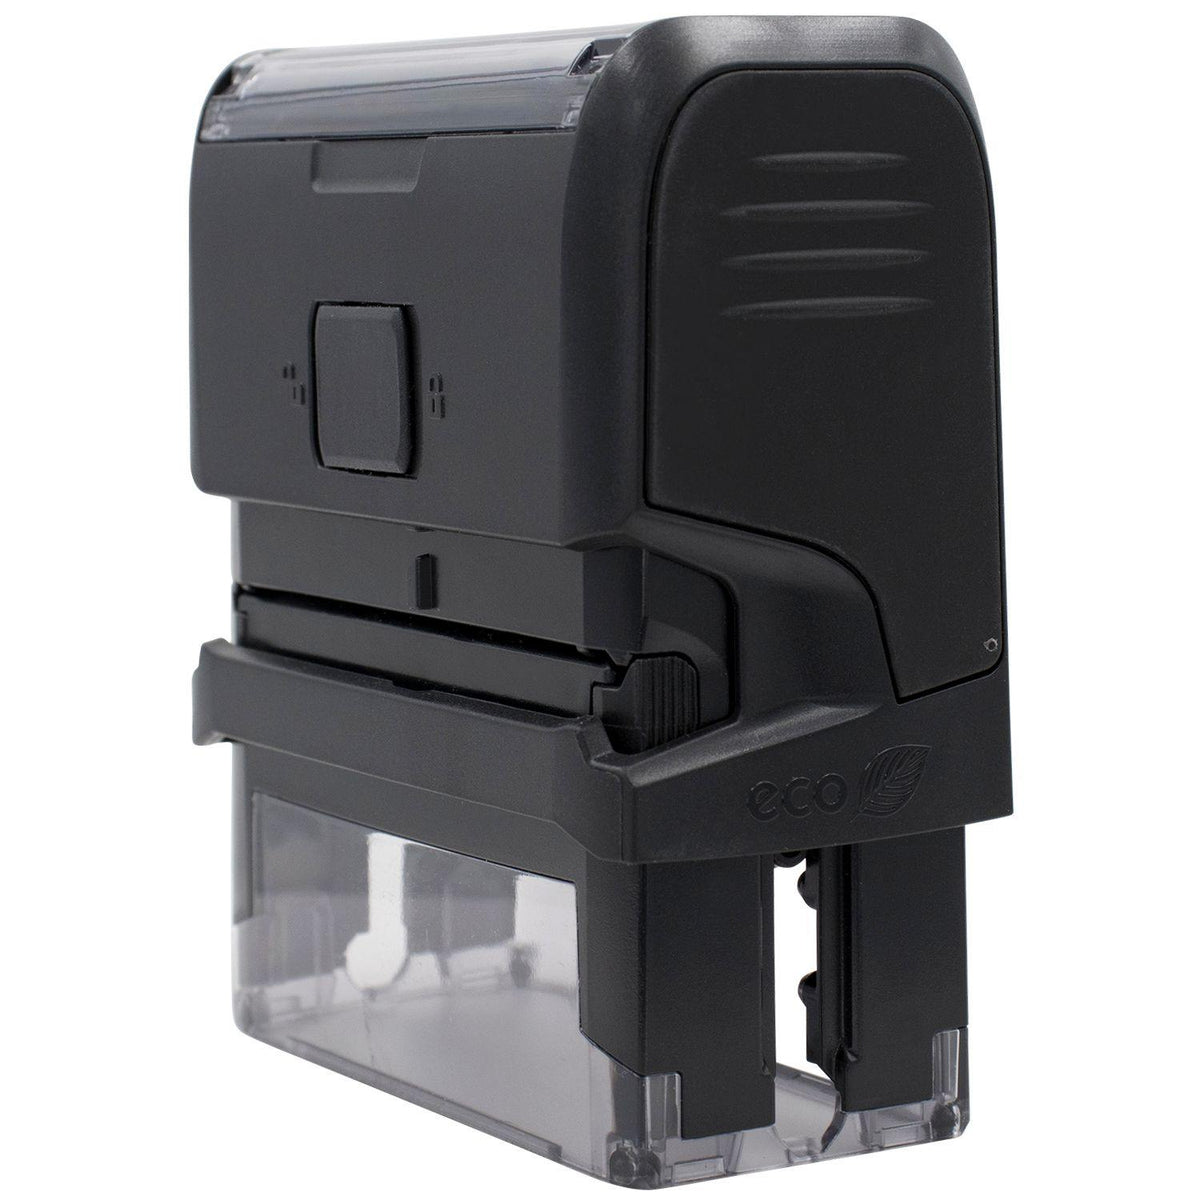 Side View of Large Self Inking Chrono Stamp at an Angle